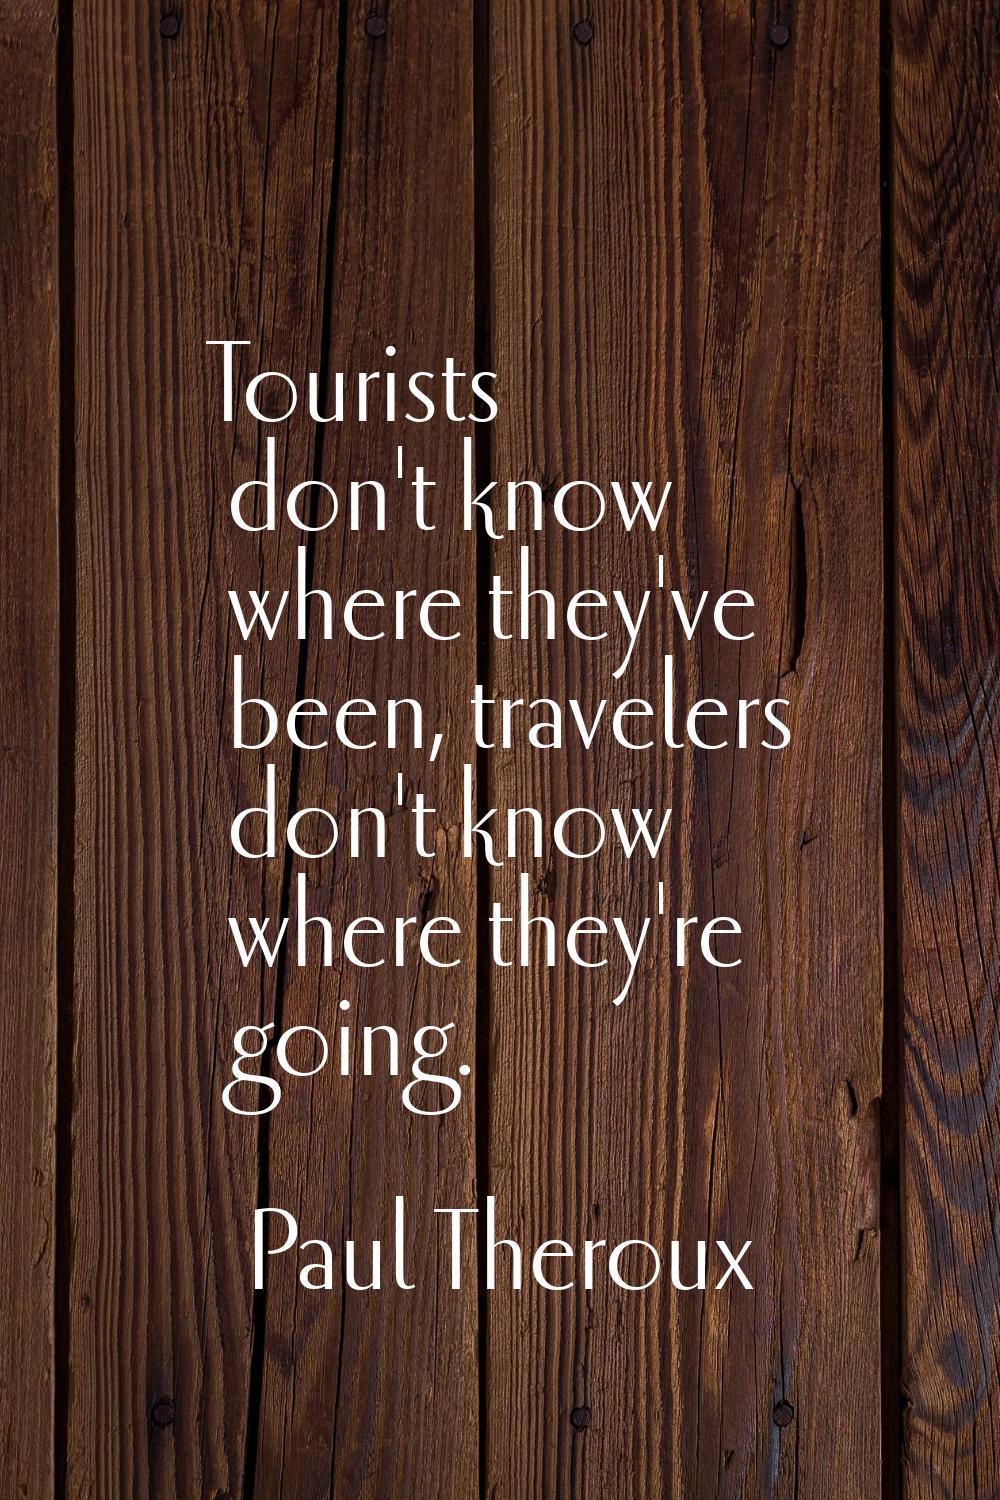 Tourists don't know where they've been, travelers don't know where they're going.